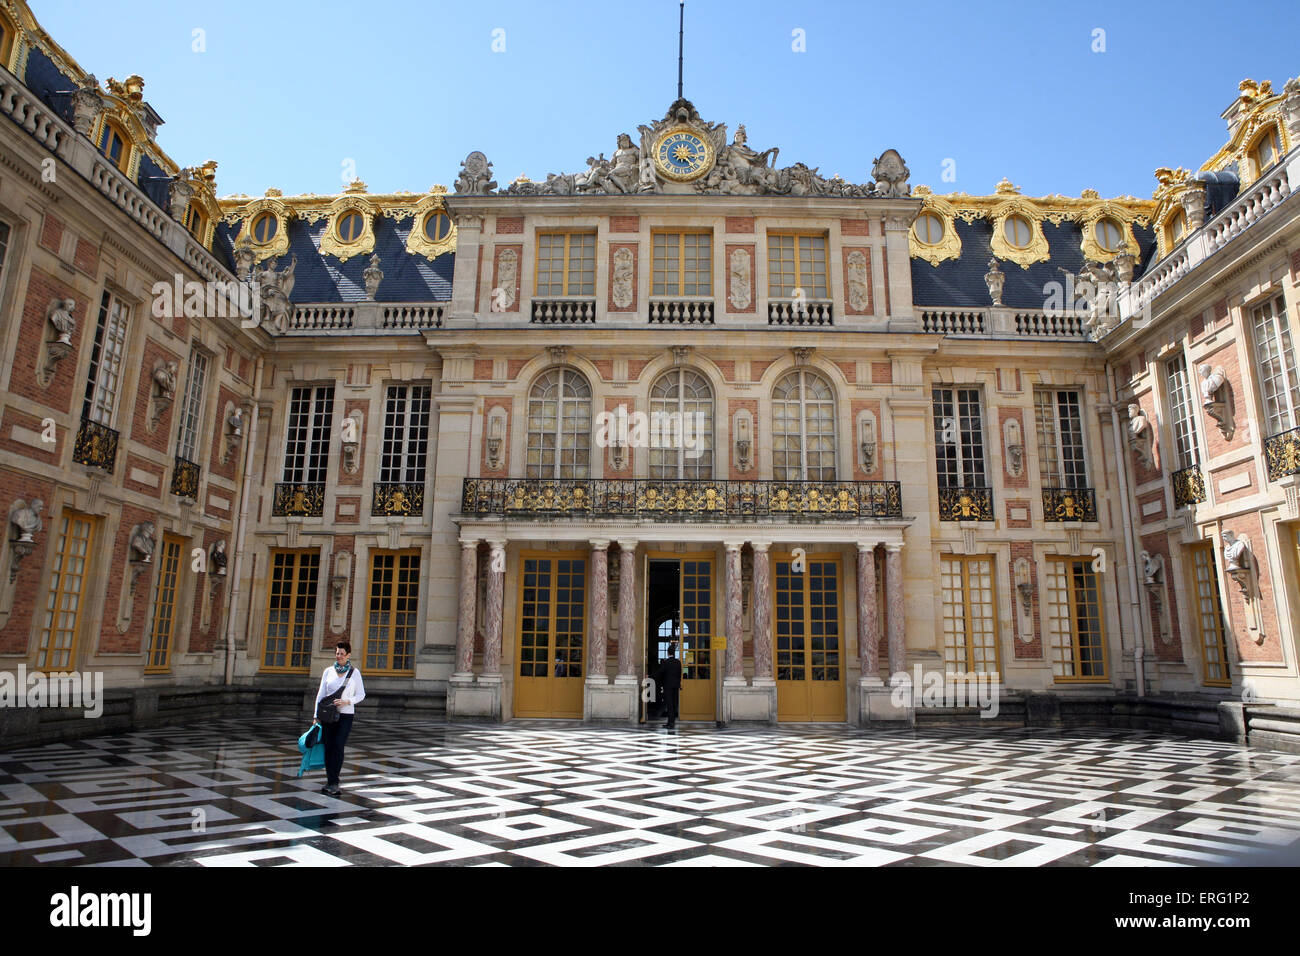 Inner courtyard Palace of Versailles France Stock Photo